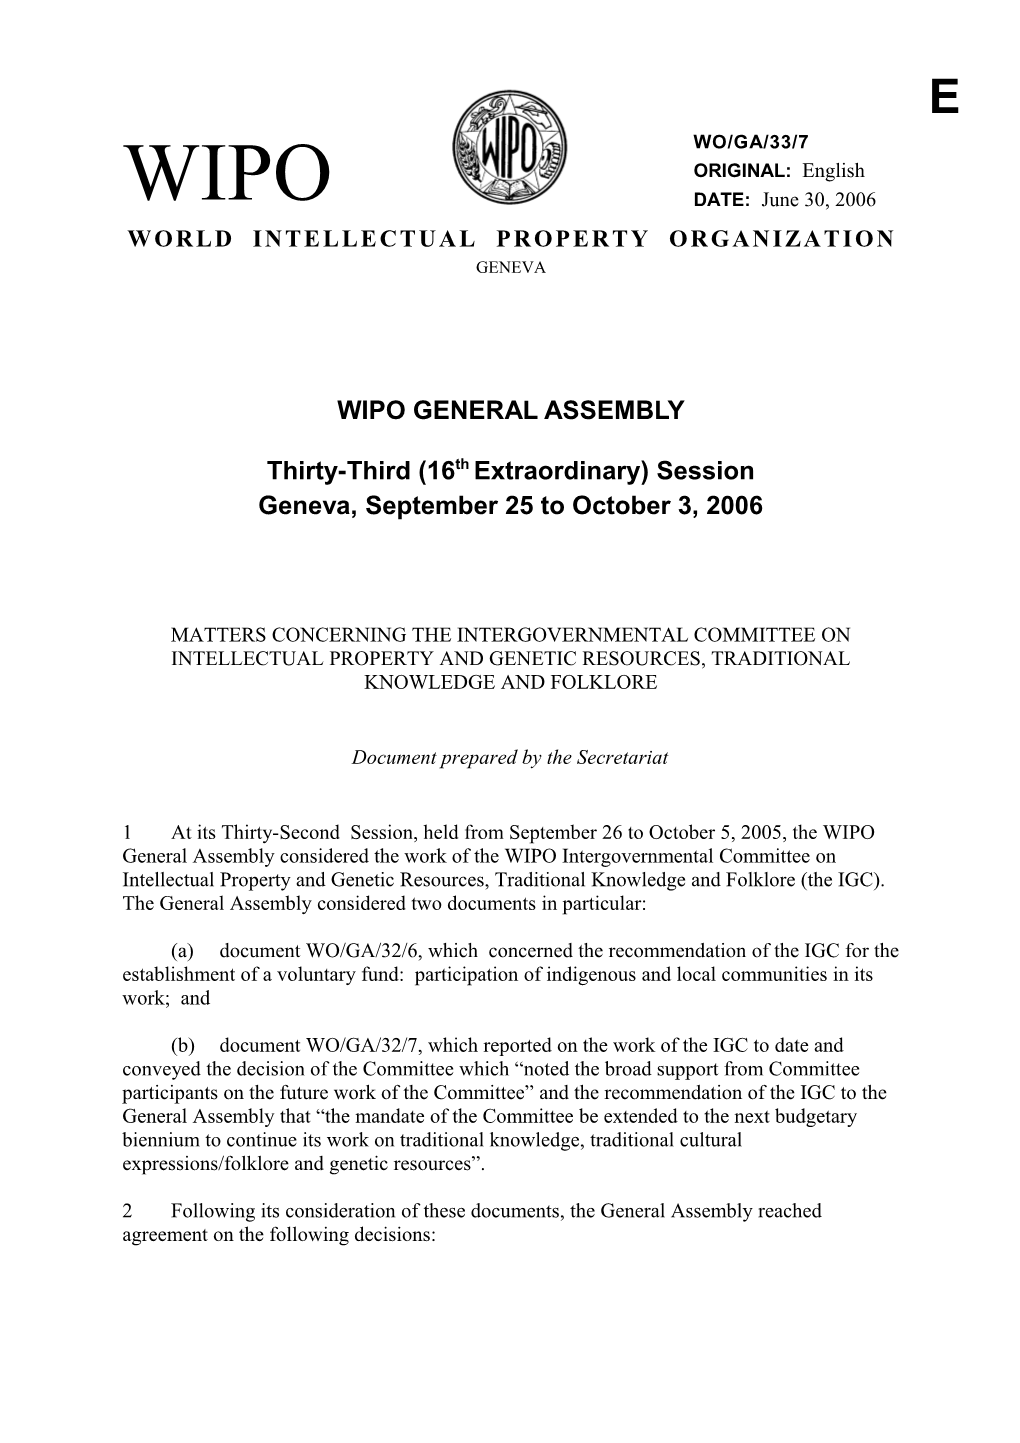 WO/GA/33/7: Matters Concerning the Intergovernmental Committee on Intellectual Property